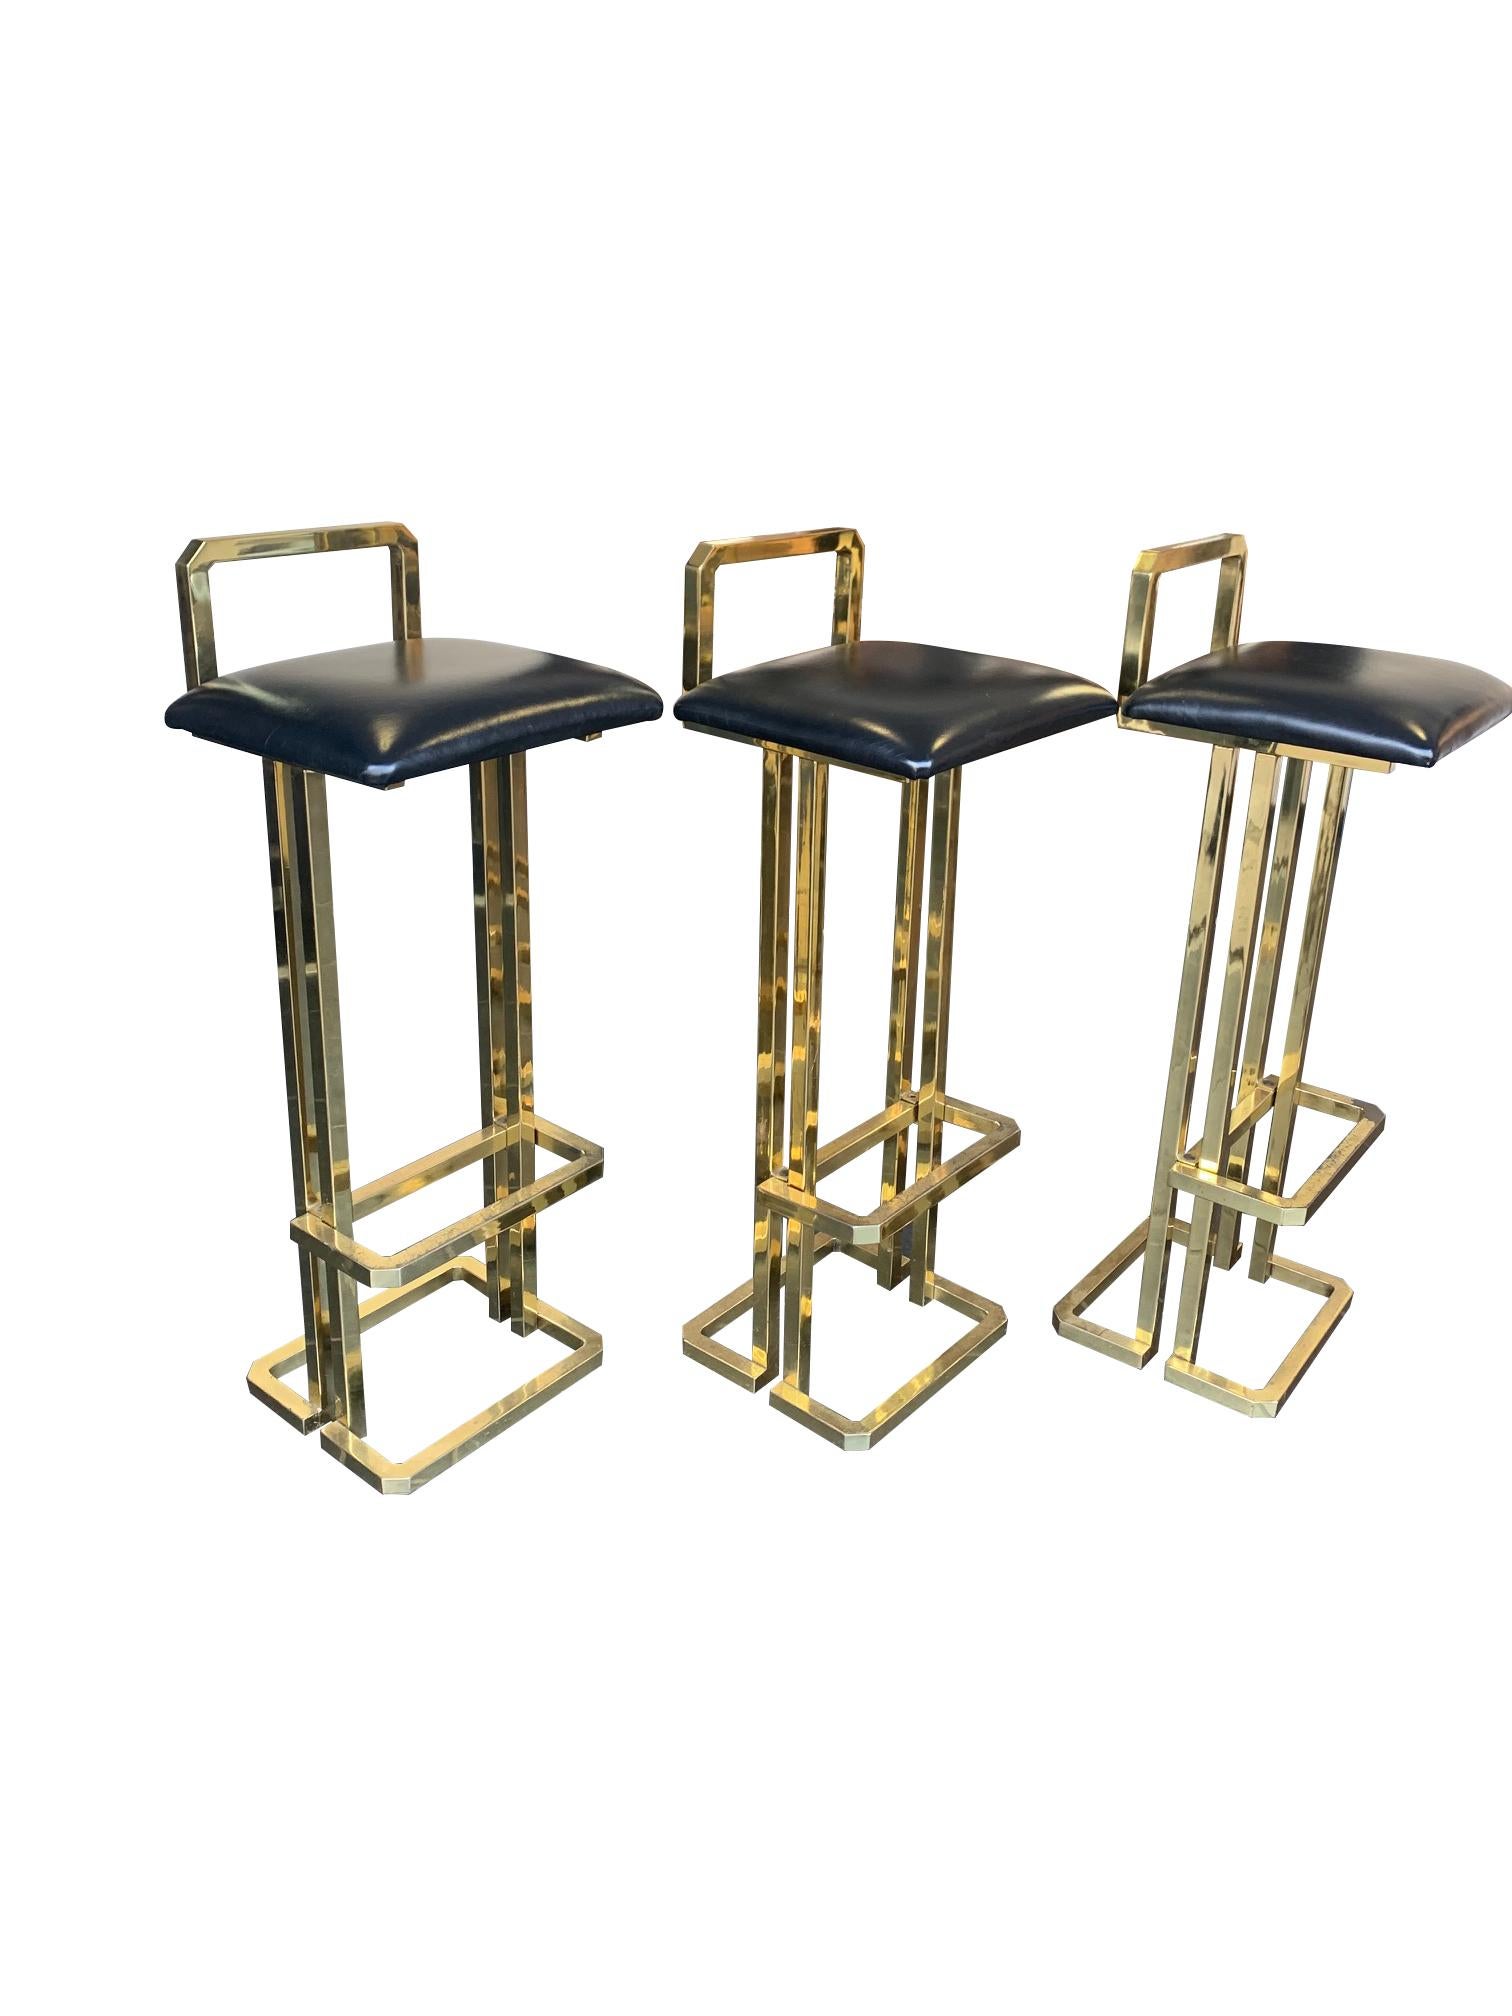 Mid-Century Modern Set of 3 Maison Jansen Style Gilt Metal Stools with Black Leather Seat Pads For Sale